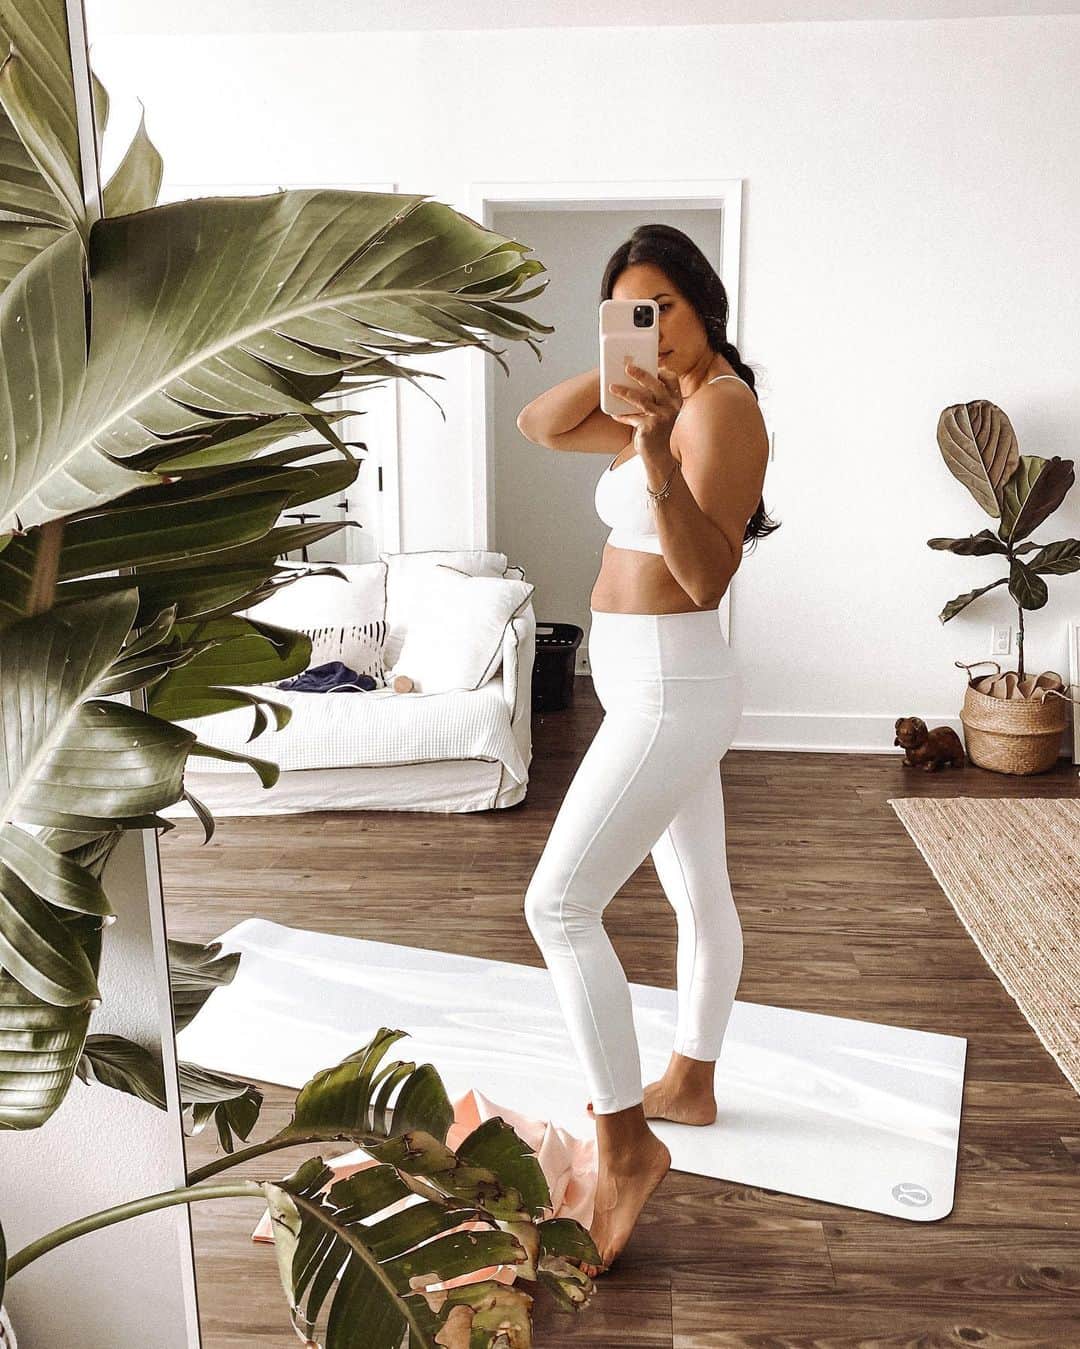 Bianca Cheah Chalmersのインスタグラム：「Hi 👋🏾, I’m Bianca for those who are new to my Instagram. Here’s a few fun facts about me...  - I’m a qualified yoga instructor and Interior Designer. Graduated yogi training because I wanted to gain more knowledge on the yoga way of life. Sadly never got to put my Interior design skills to use yet. Maybe one day soon... - I used to play competition tennis and I have a whole cupboard full of trophies 🏆 .  - I used to play 6th grade classical piano, hence why you always hear piano music playing in the background of my IG stories 🎹— cause it’s so relaxing.  - I’m half Chinese, and my mothers side are all Irish decent.  - I am a twin, and we are fraternal twins. So look totally different to each other 🙎🏻‍♀️🙎🏽‍♀️ - My favourite food is Italian and Indian - You’ll always find in my handbag 10 different lip balms 🤣 - My weakness is Cadbury white chocolate - Go-to fashion style is a maxi dress with white sneakers - I love to cook and my fav dish to cook is Spaghetti Bolognese or Shepard’s 🥧  - I’m 5’5 tall 😜 and was born with olive skin tone even though no one in my family is dark, not even my twin sister 🤷🏽‍♀️ - I am a mother of 2, a 15 month old baby and a 6 year old creme caramel french bulldog 🥰」